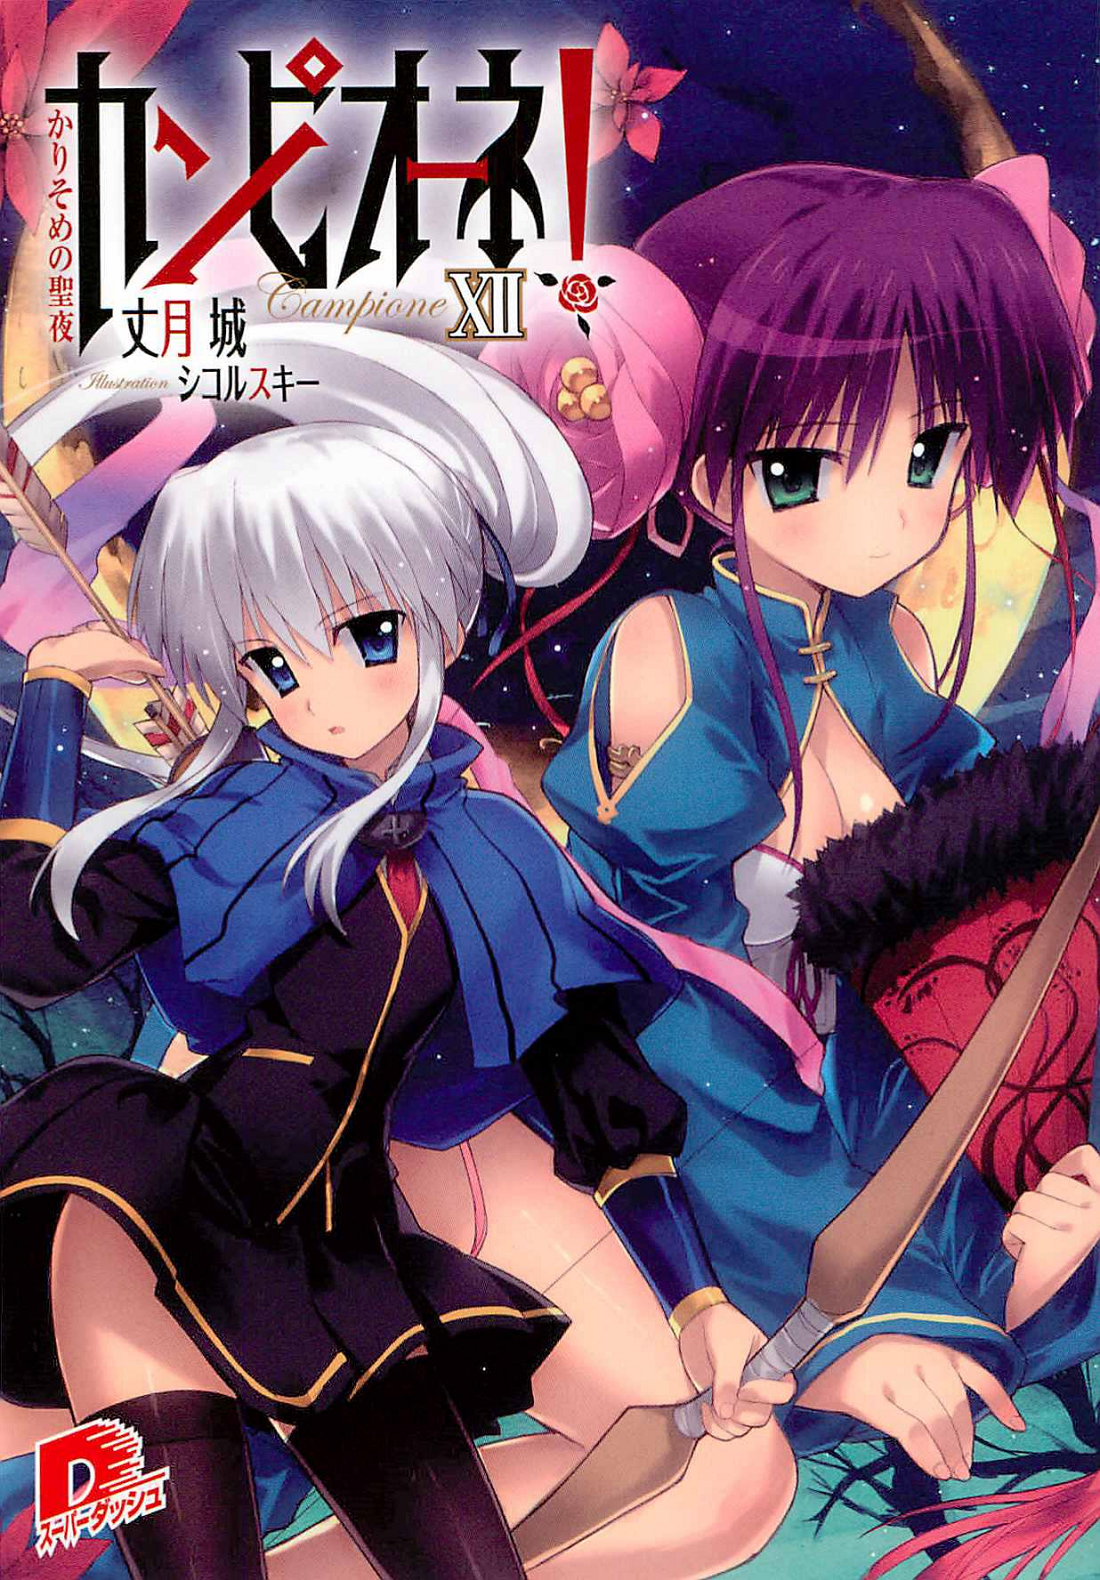 Campione! Light Novel Series Ends This Month, New Series Begins in